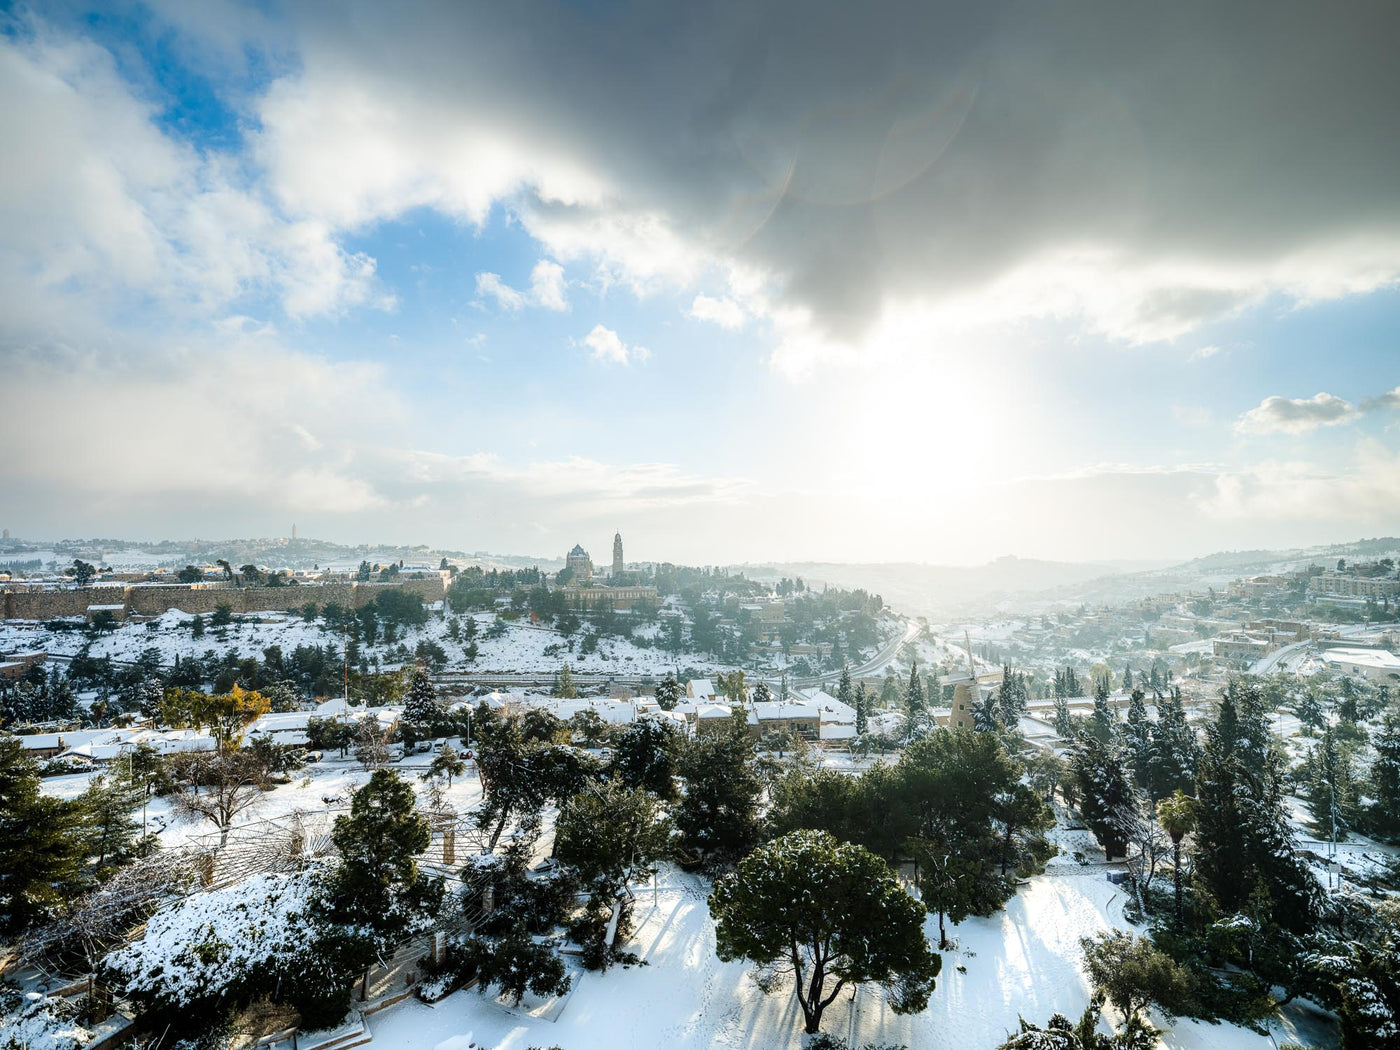 Light from Beyond - By Yehoshua Aryeh - Photograph of Israel - Jerusalem Covered in Snow